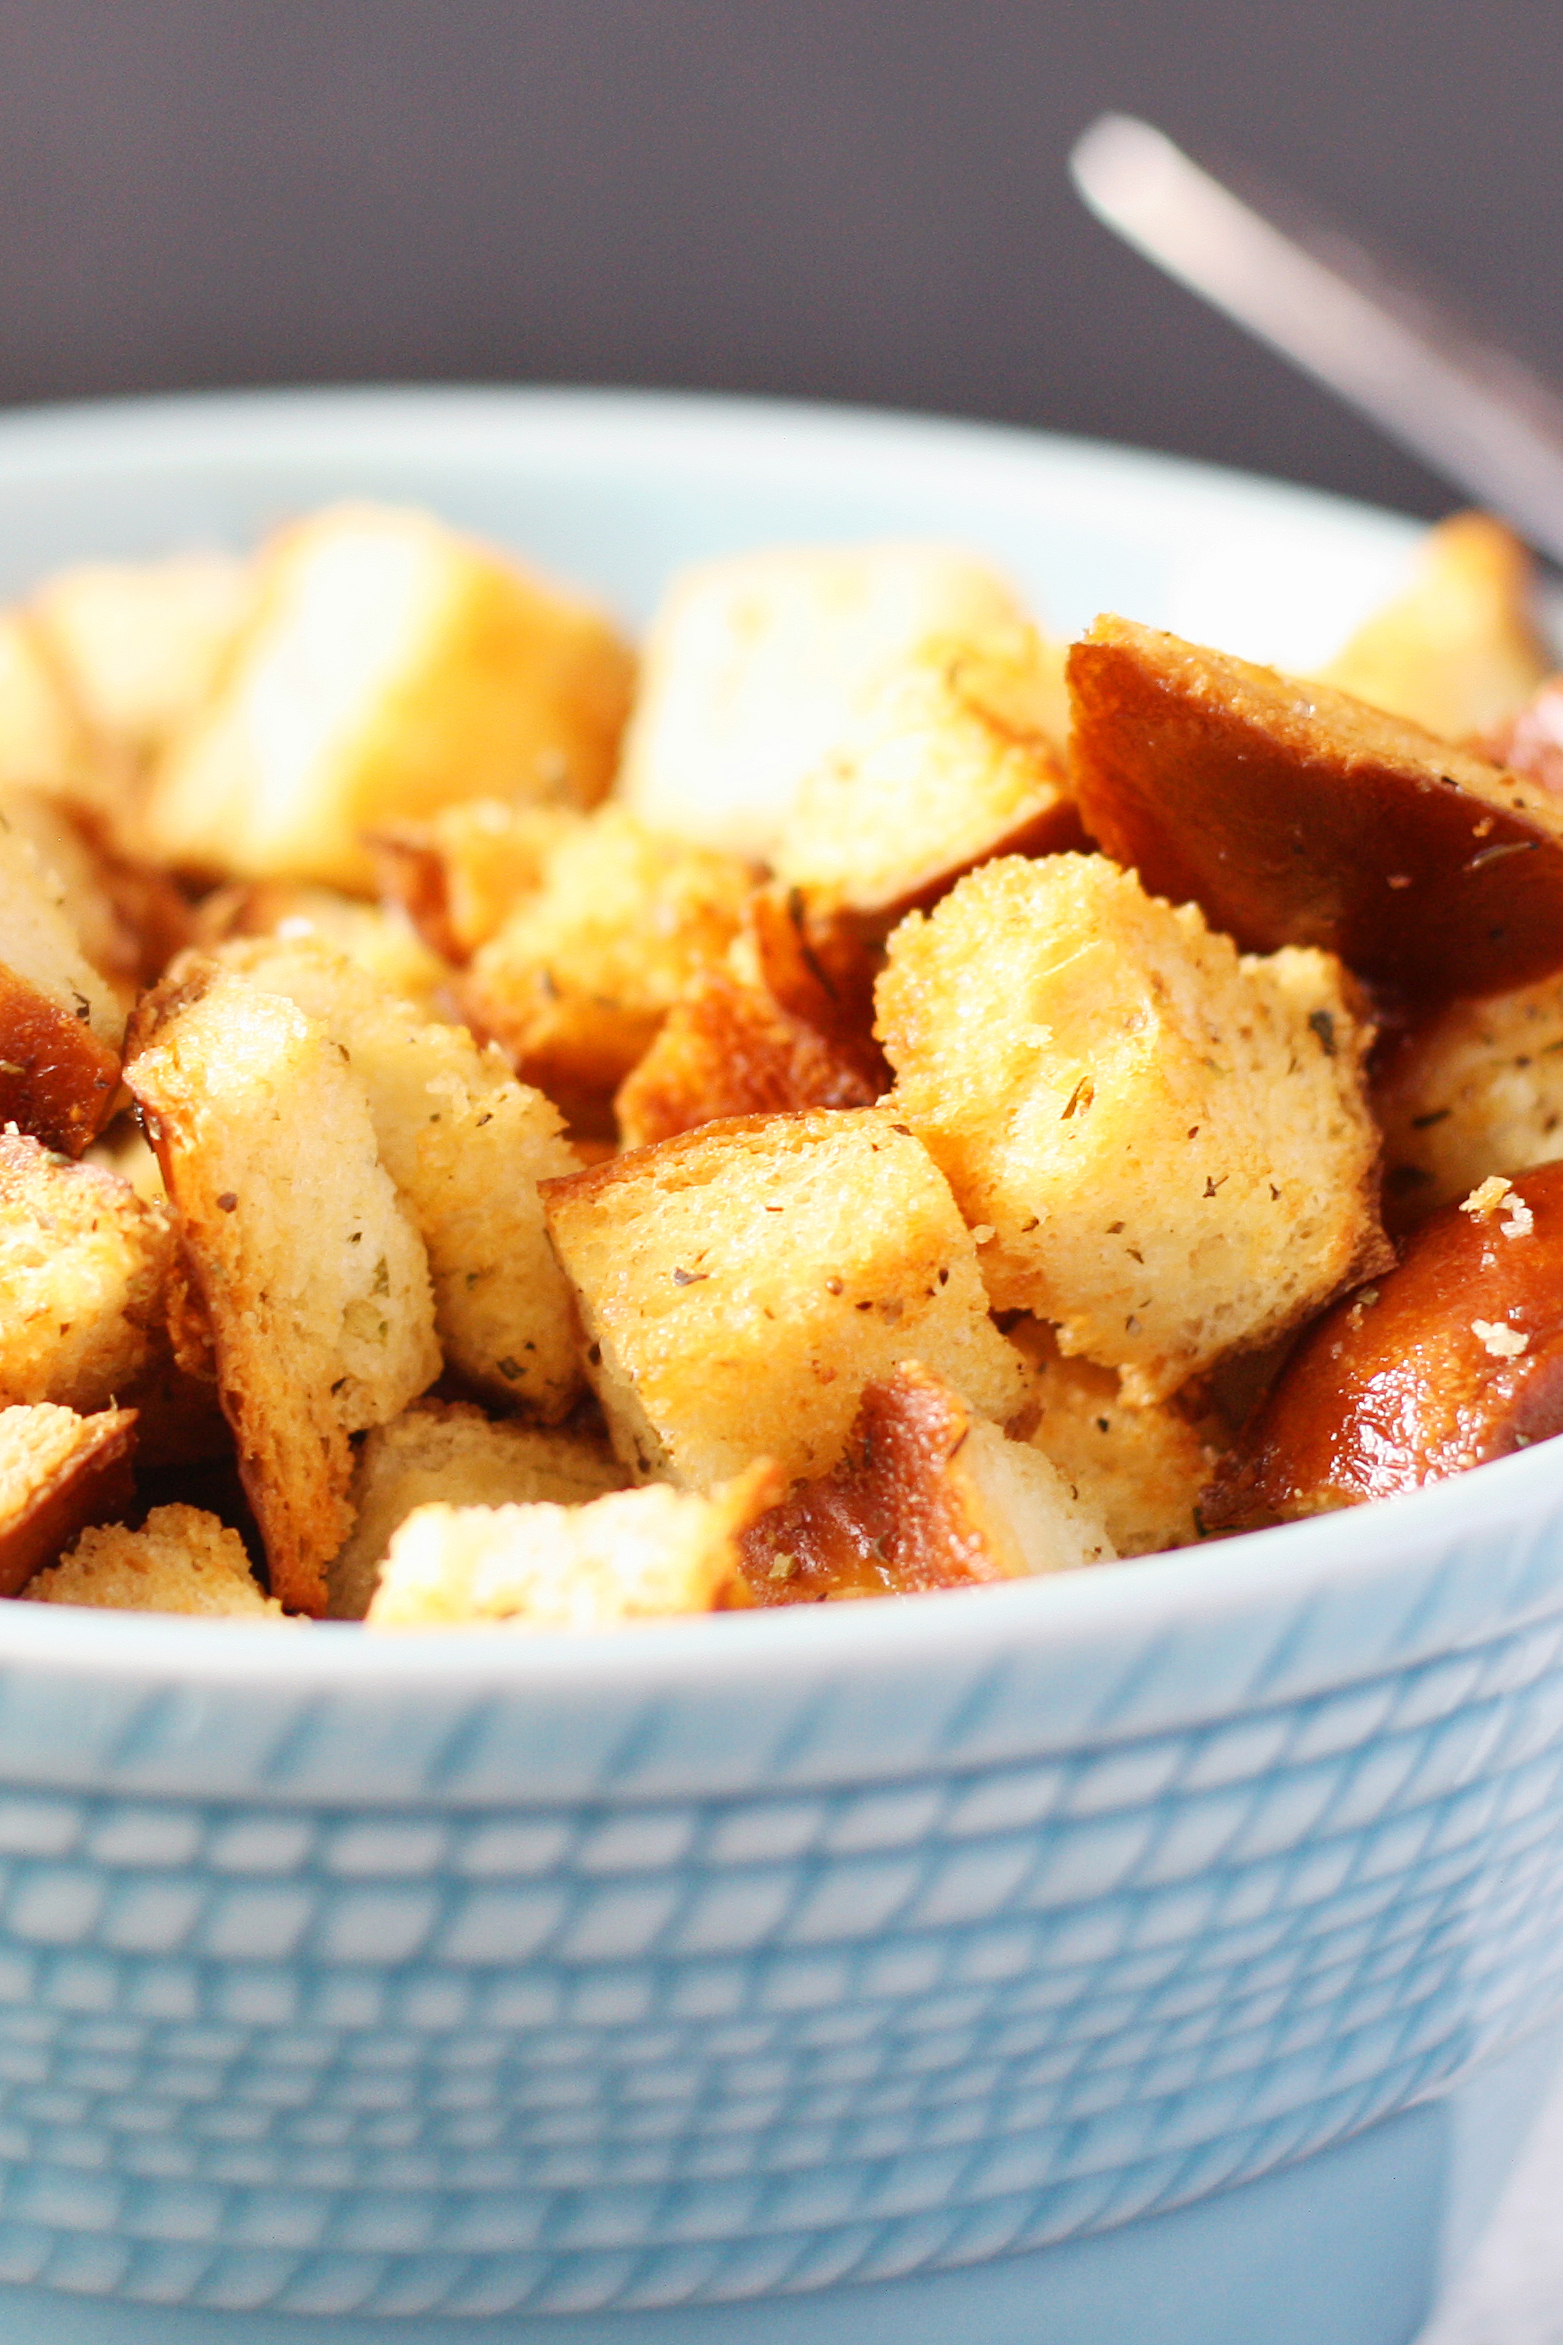 golden brown croutons in a blue bowl